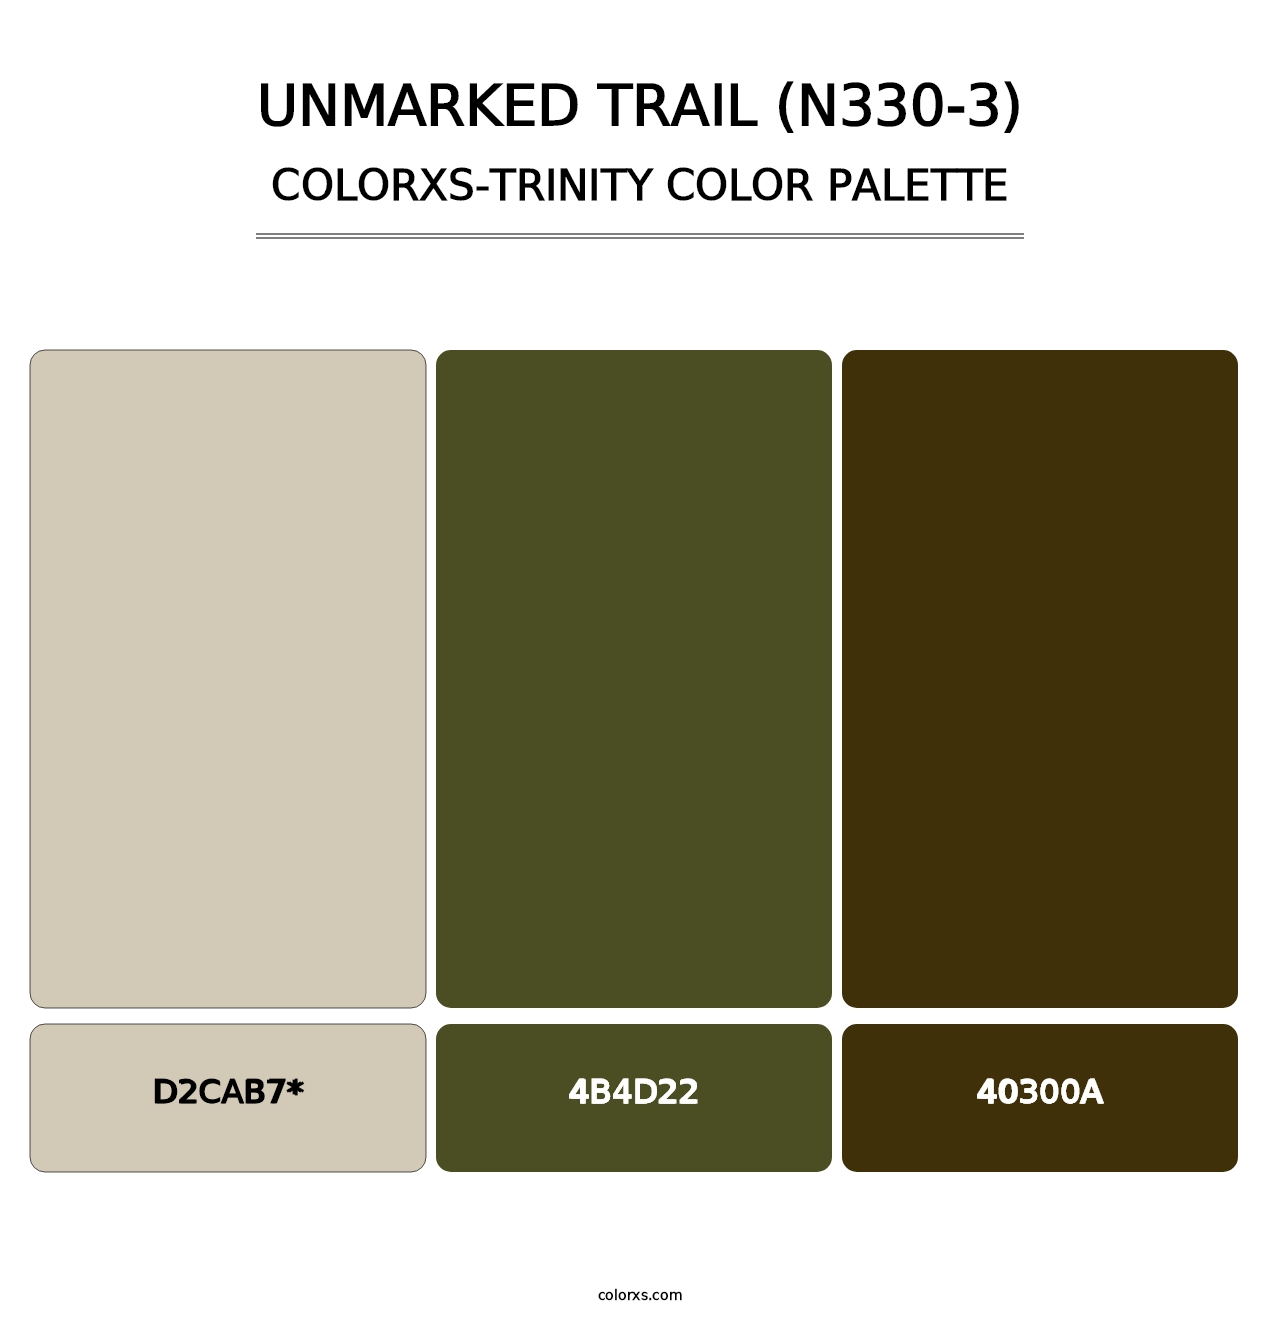 Unmarked Trail (N330-3) - Colorxs Trinity Palette